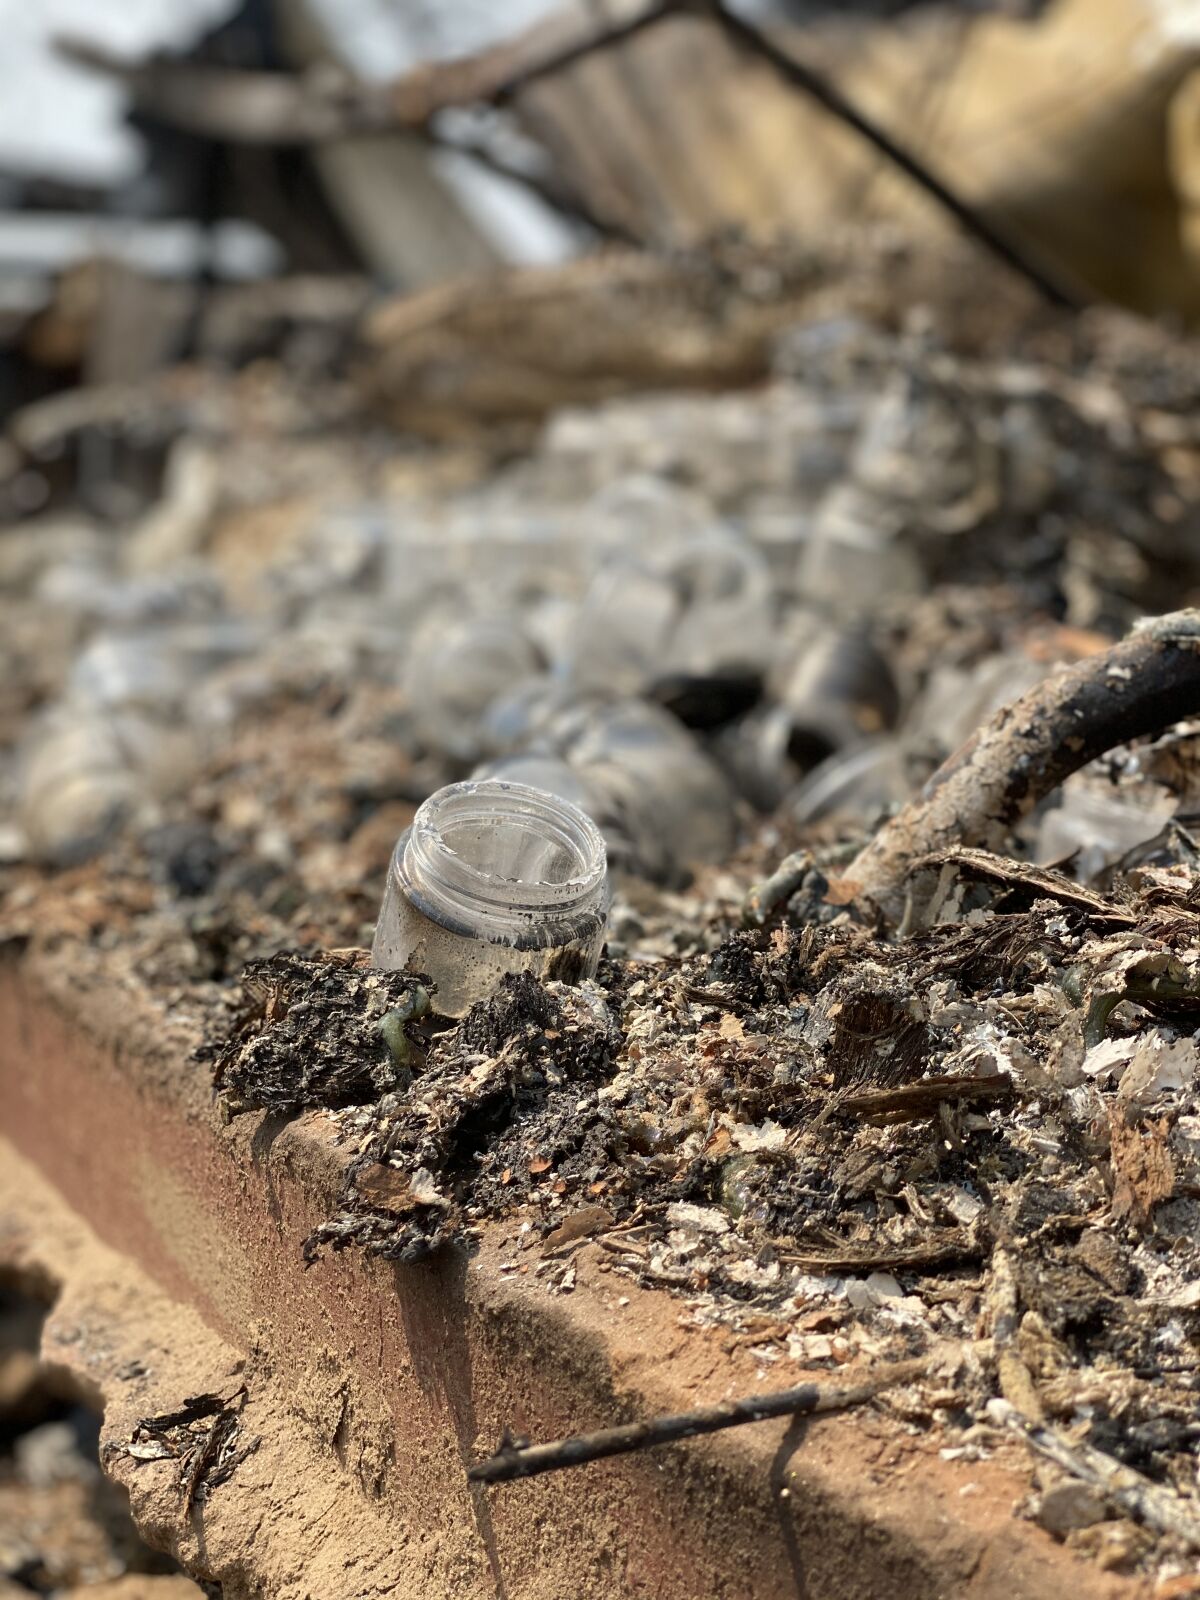 A glass jar among the ruins of No Boundaries Farm after the Valley fire